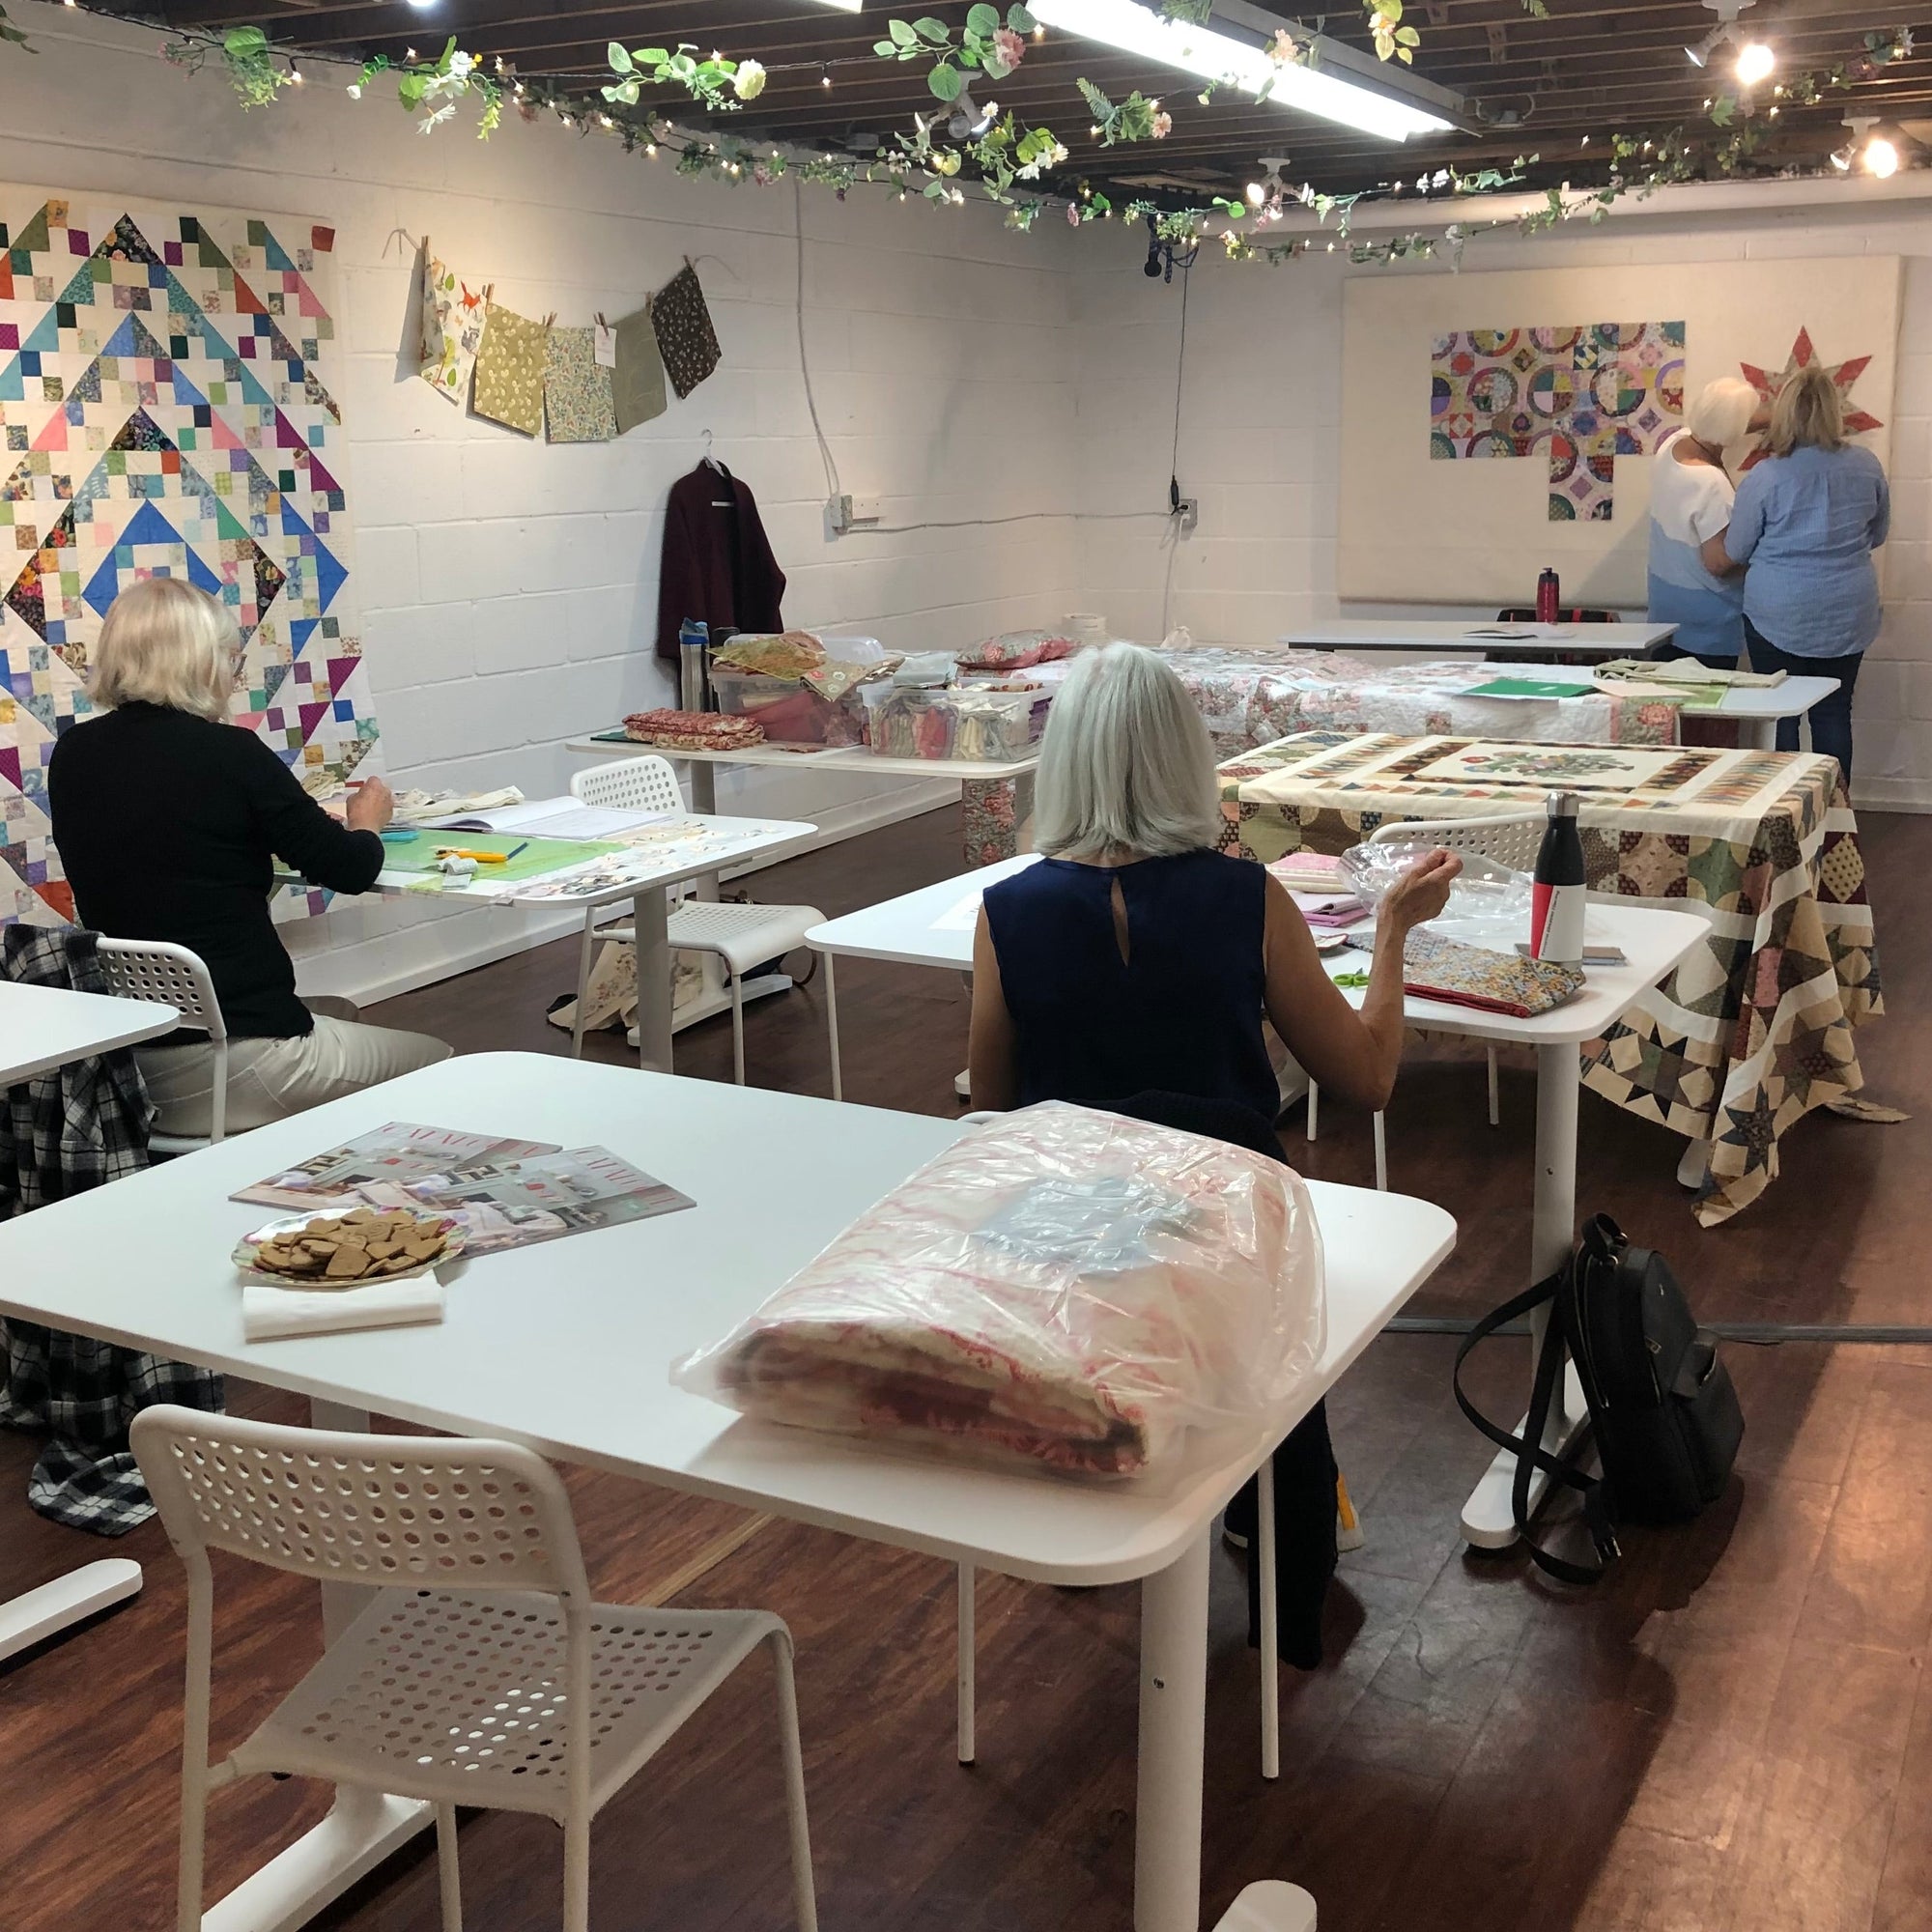 Quilting Drop In - Saturday May 11th 1pm to 4pm $19 per hour